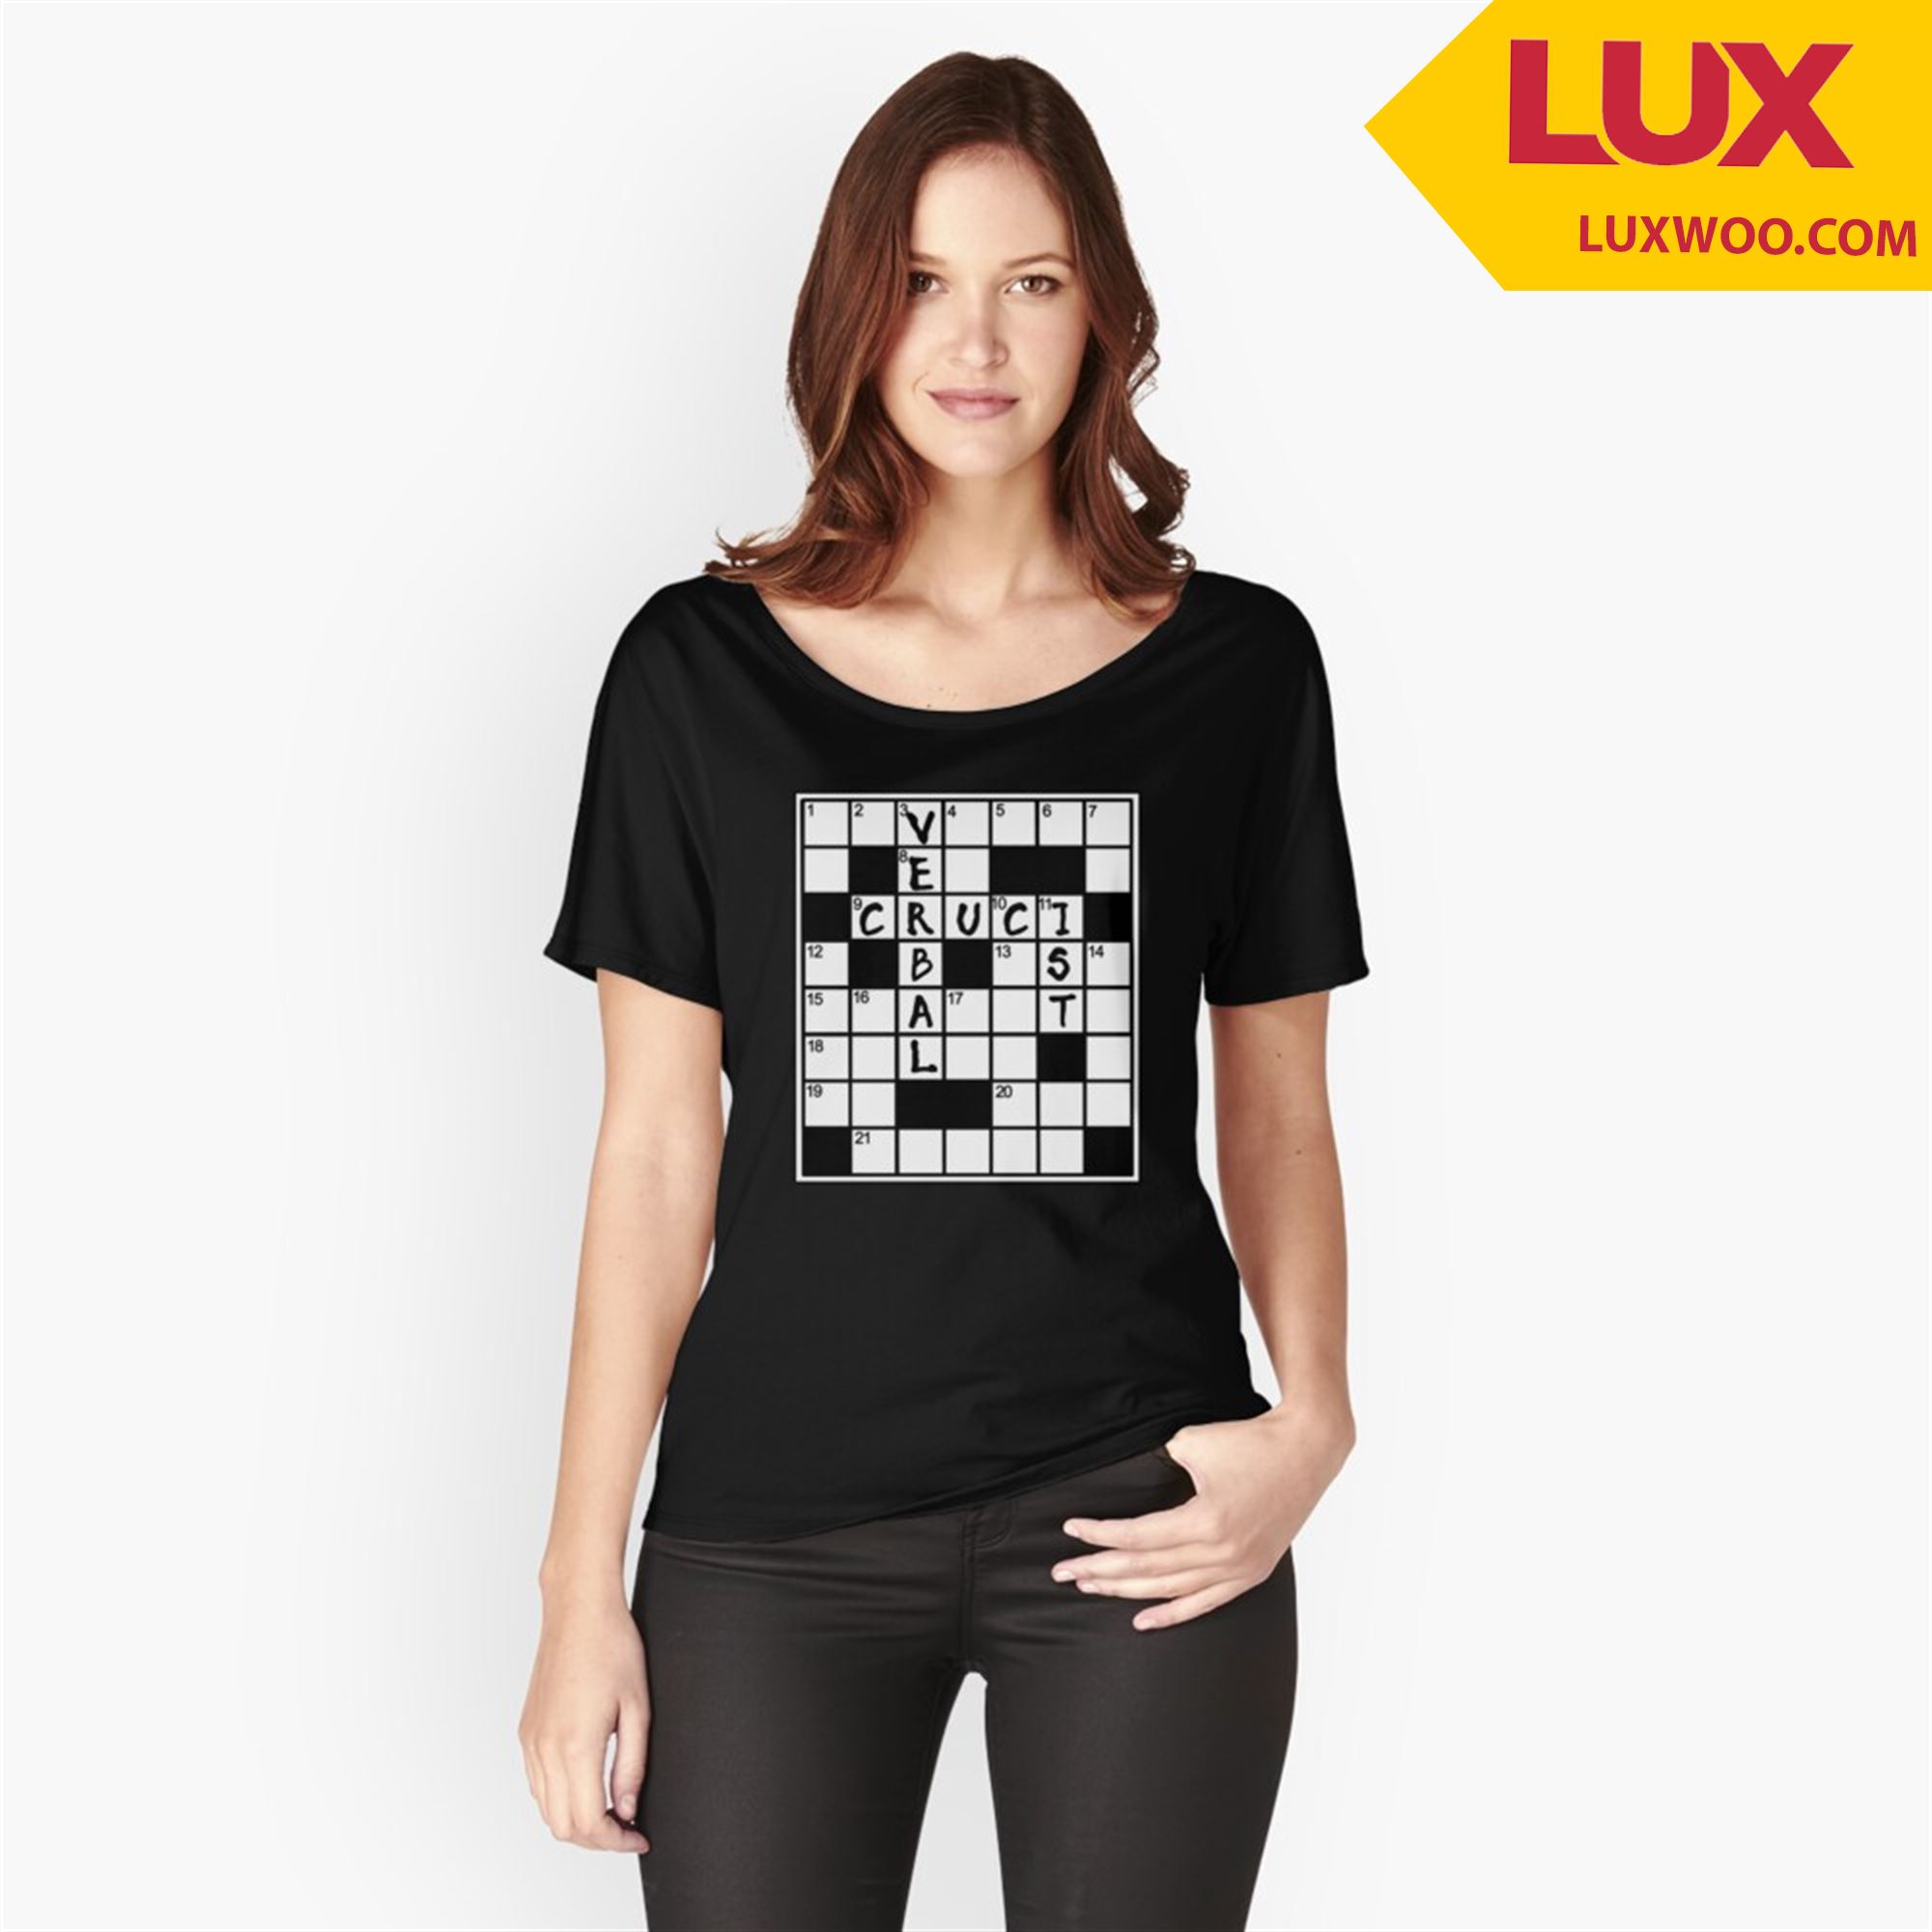 Cruciverbalist Crossword Puzzle Lovers Relaxed Fit T-shirt Eye Part Crossword Shirt